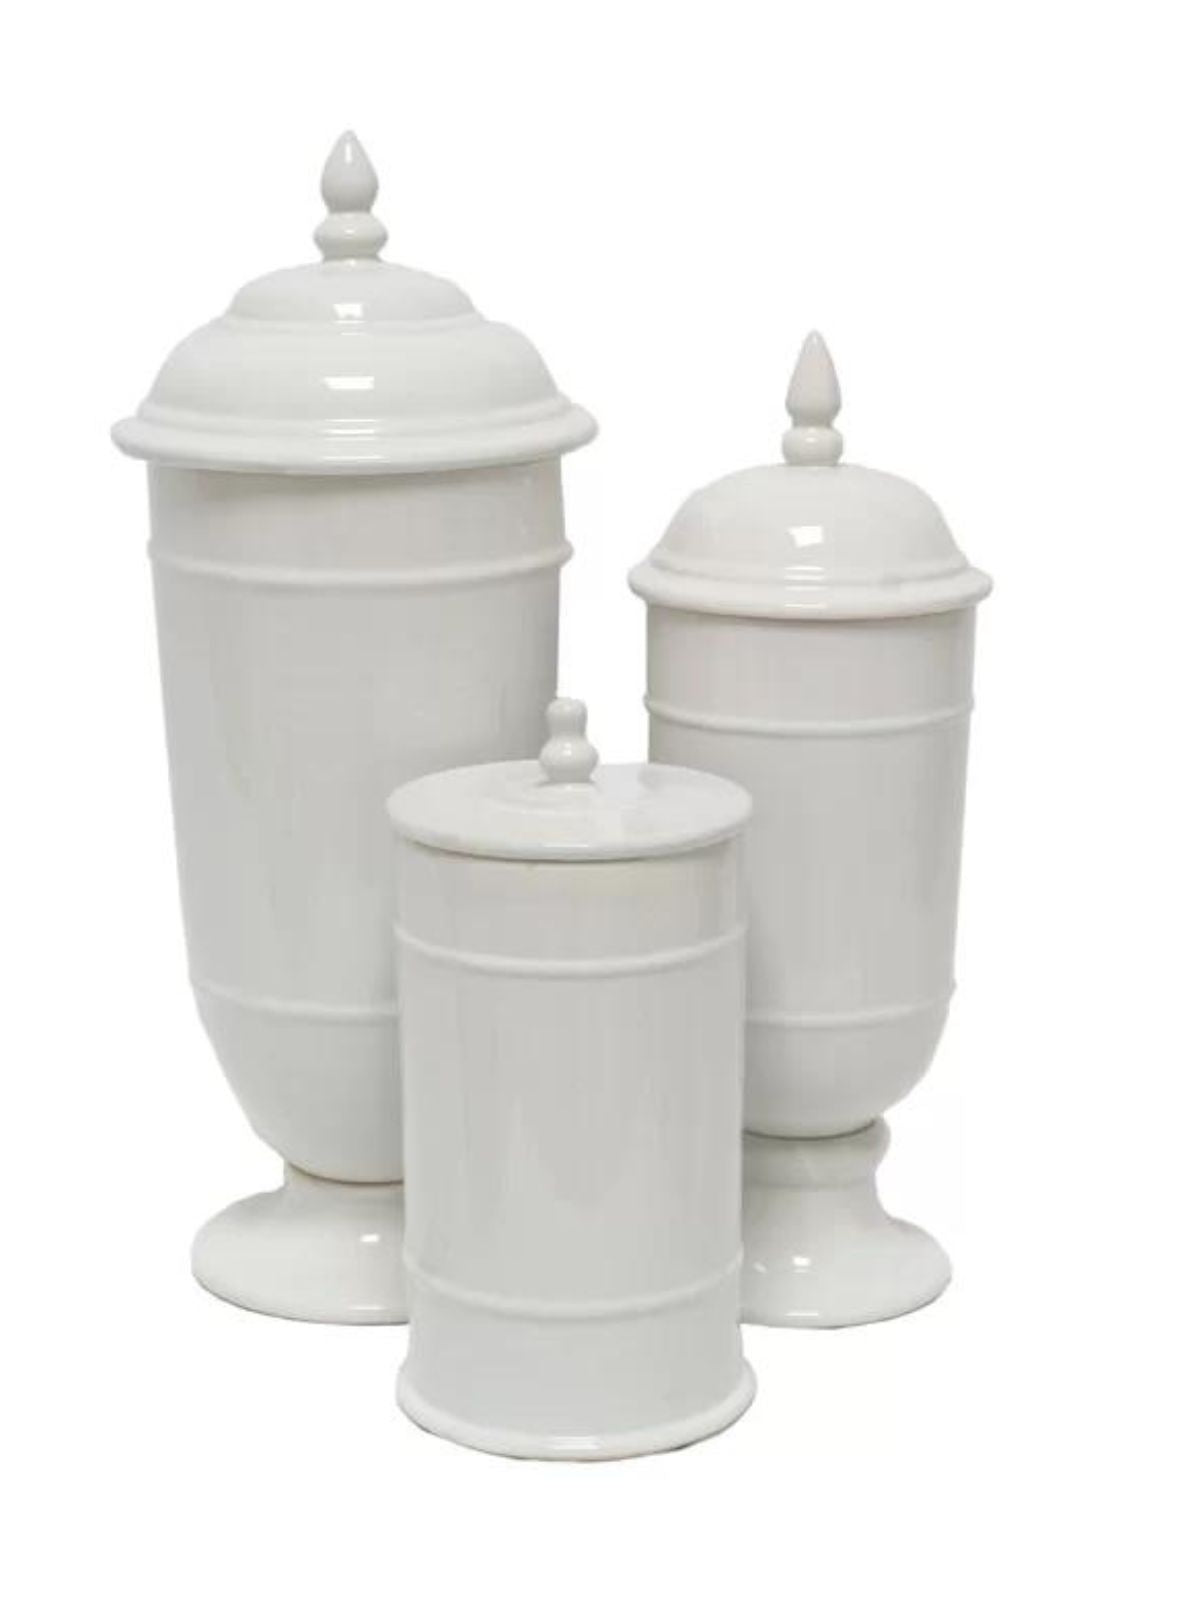 Set of 3 White Glossy Ceramic Kitchen Storage Canisters sold by KYA Home Decor